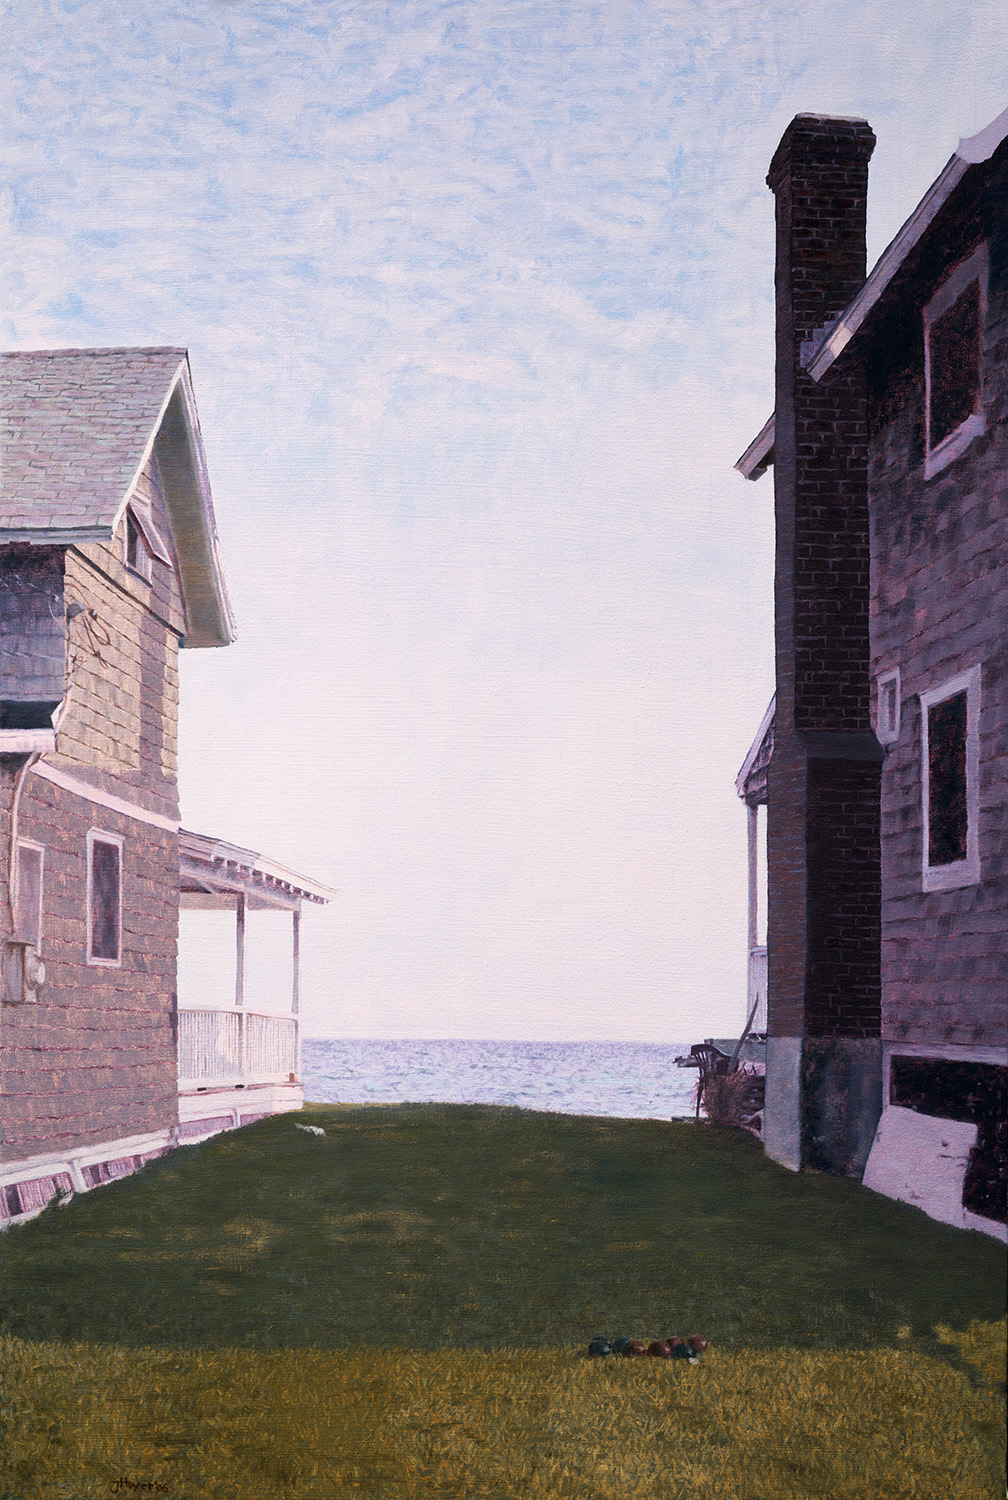   Between 2 Houses , 2006 Oil on linen 40 x 27 inches 